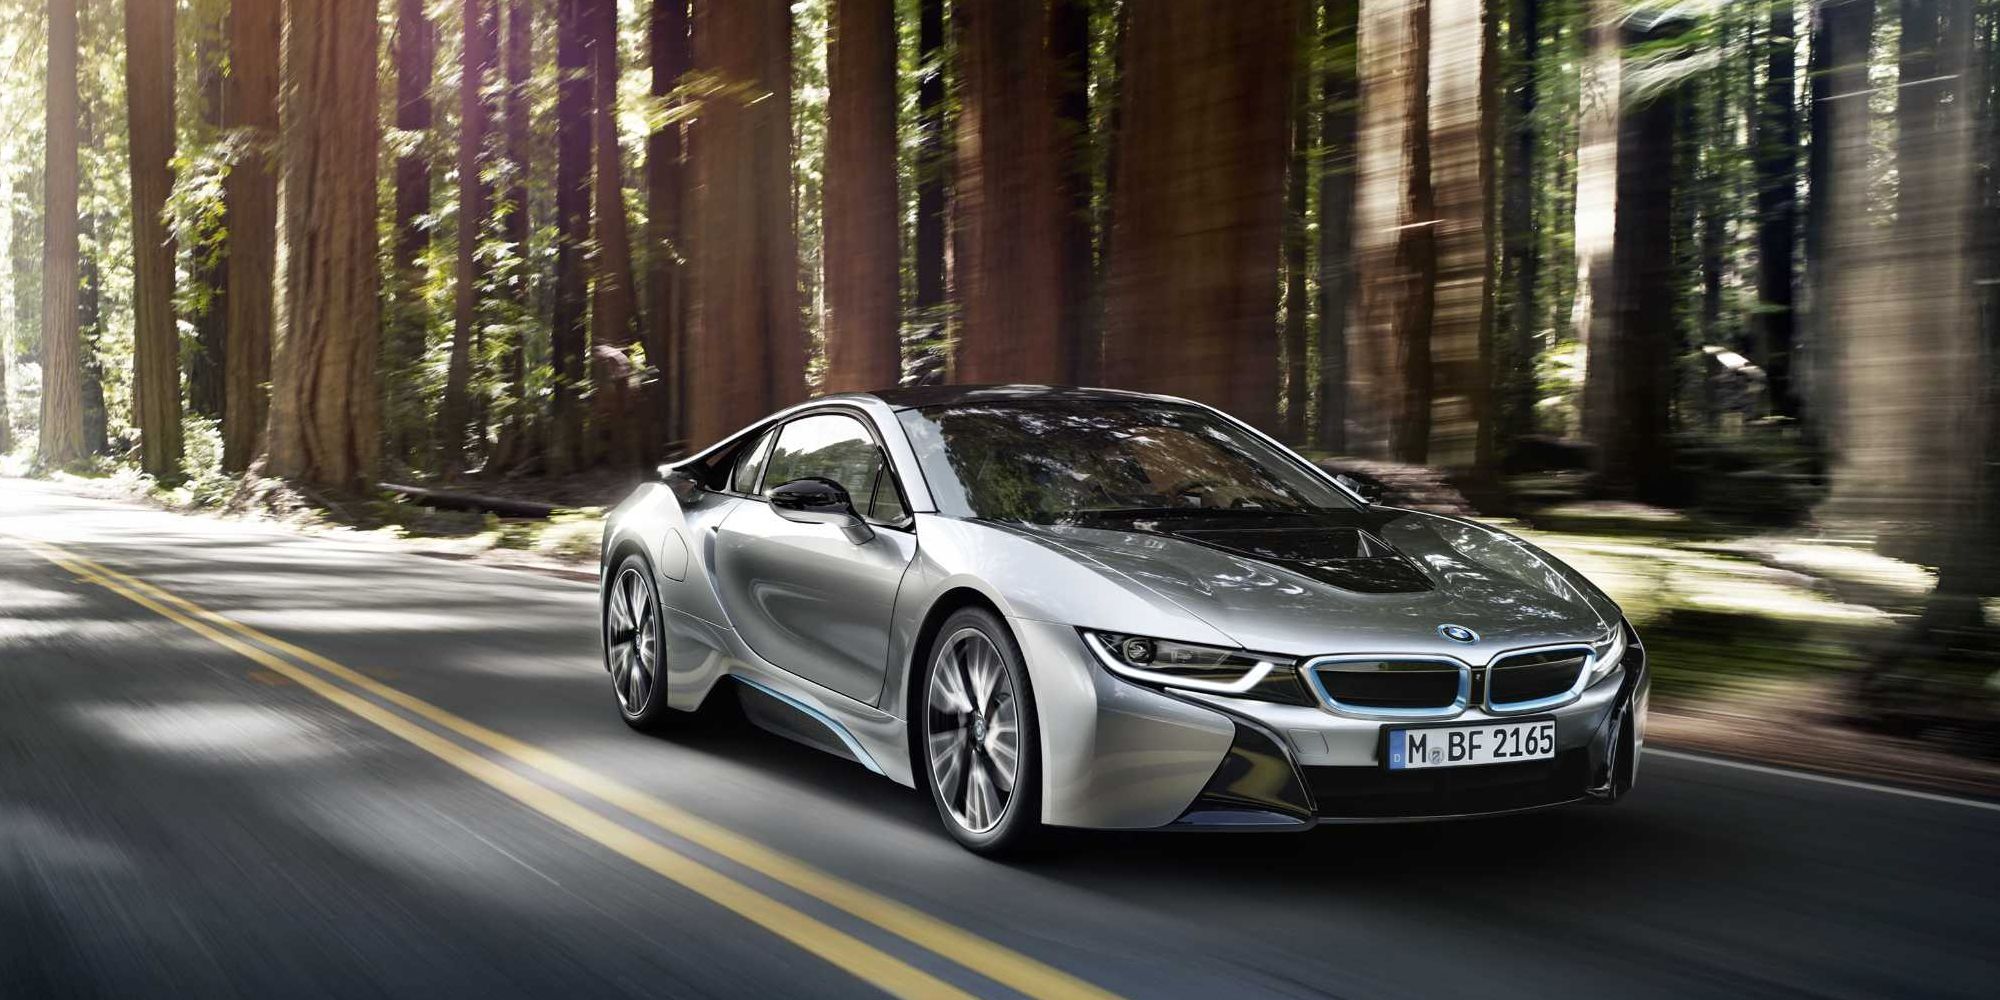 The front of the BMW i8